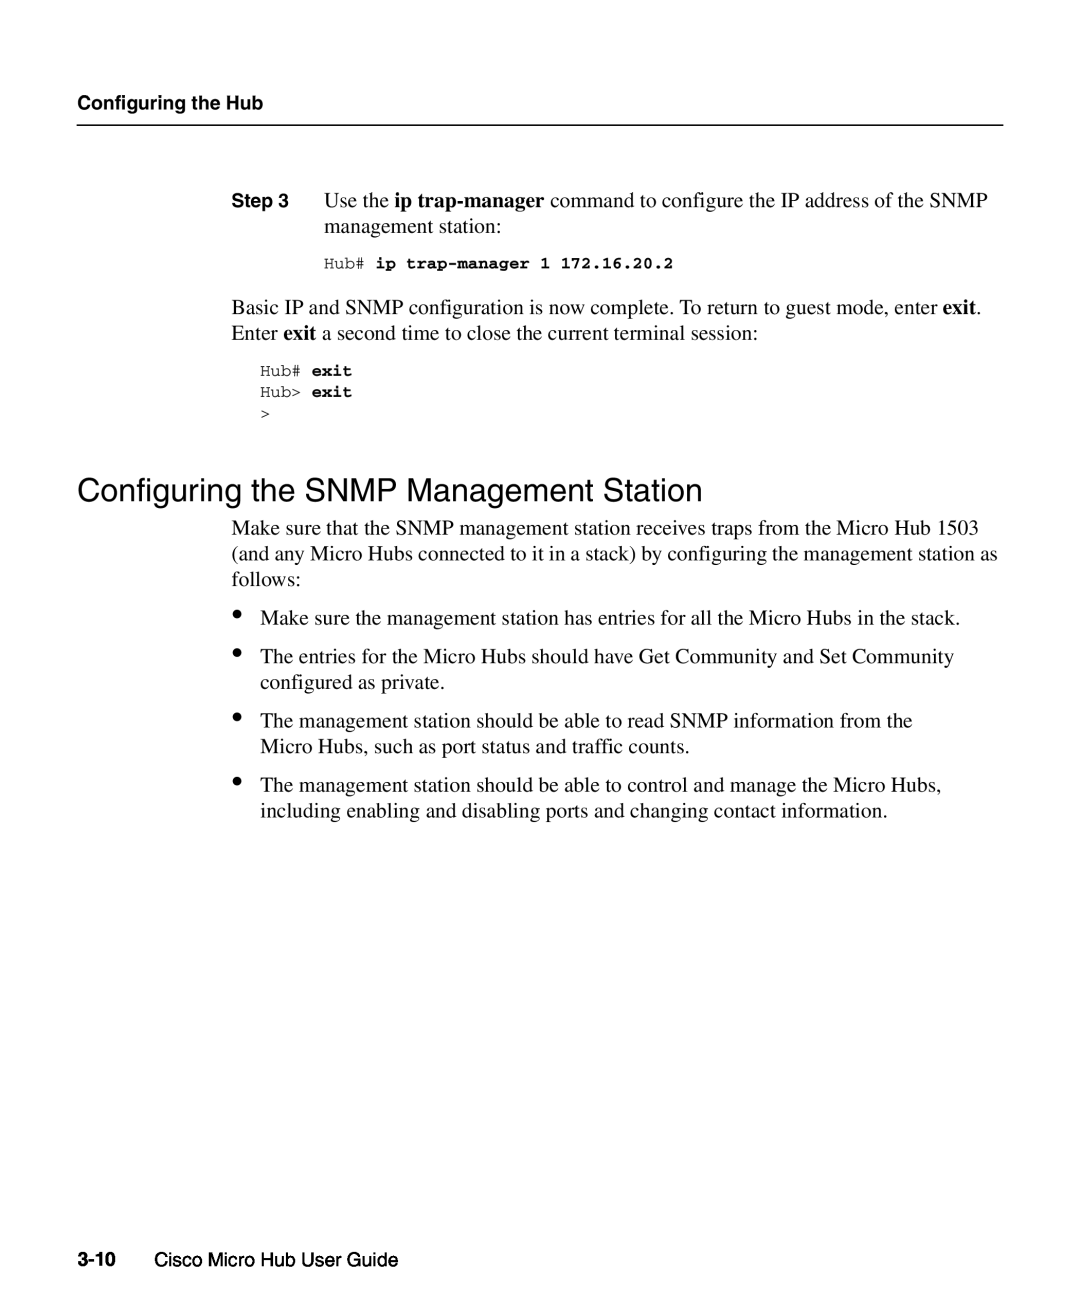 Cisco Systems 1503 manual Configuring the SNMP Management Station, Cisco Micro Hub User Guide 